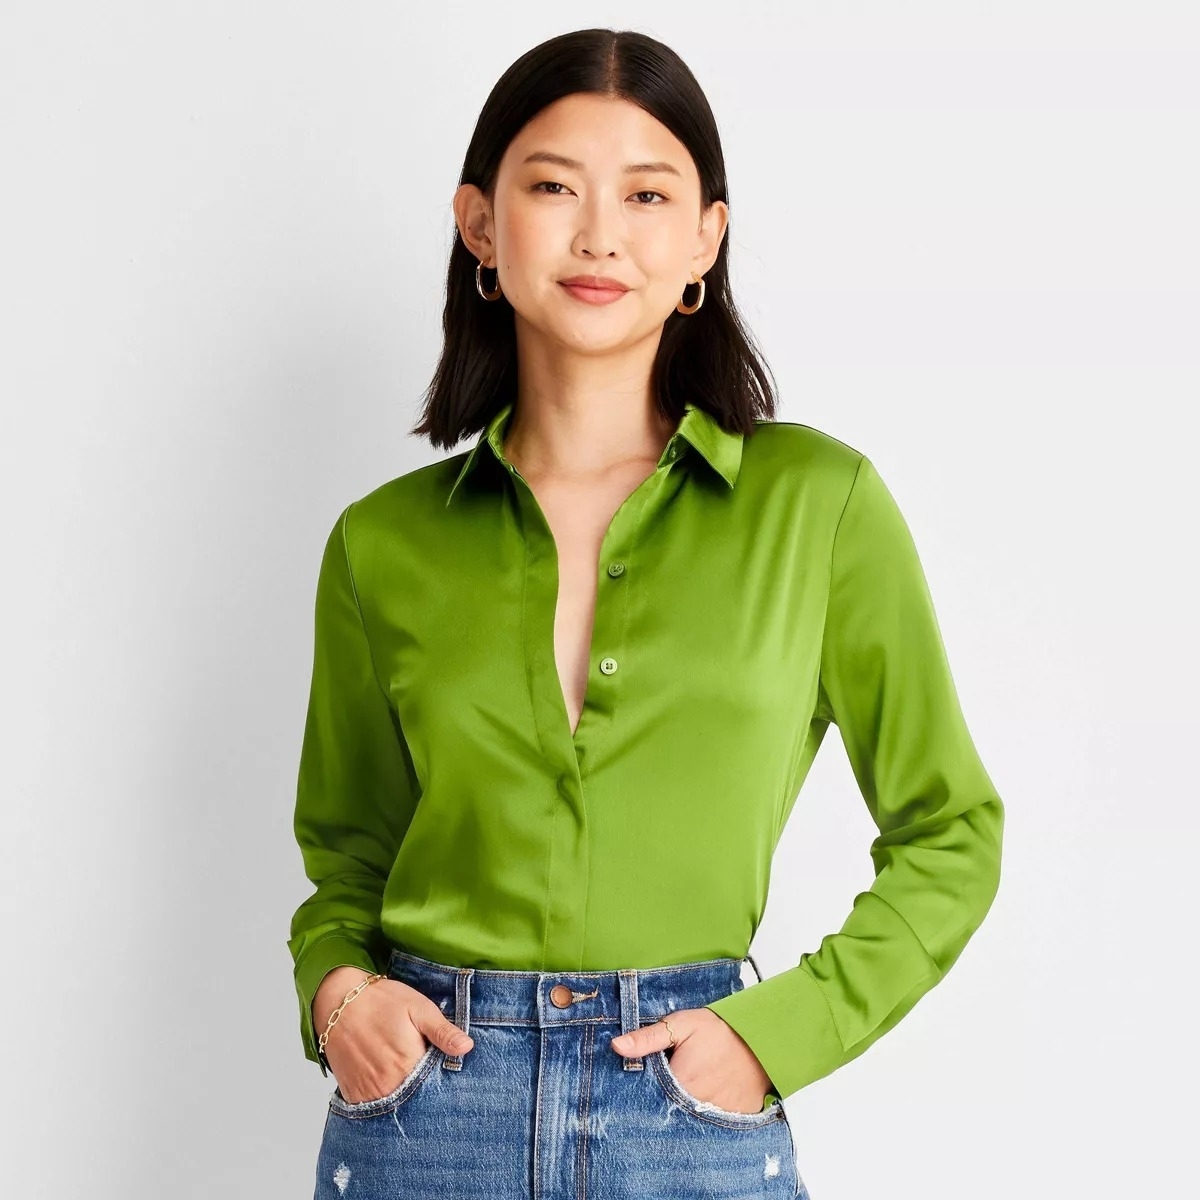 model wearing green long-sleeve button-front shirt with blue jeans